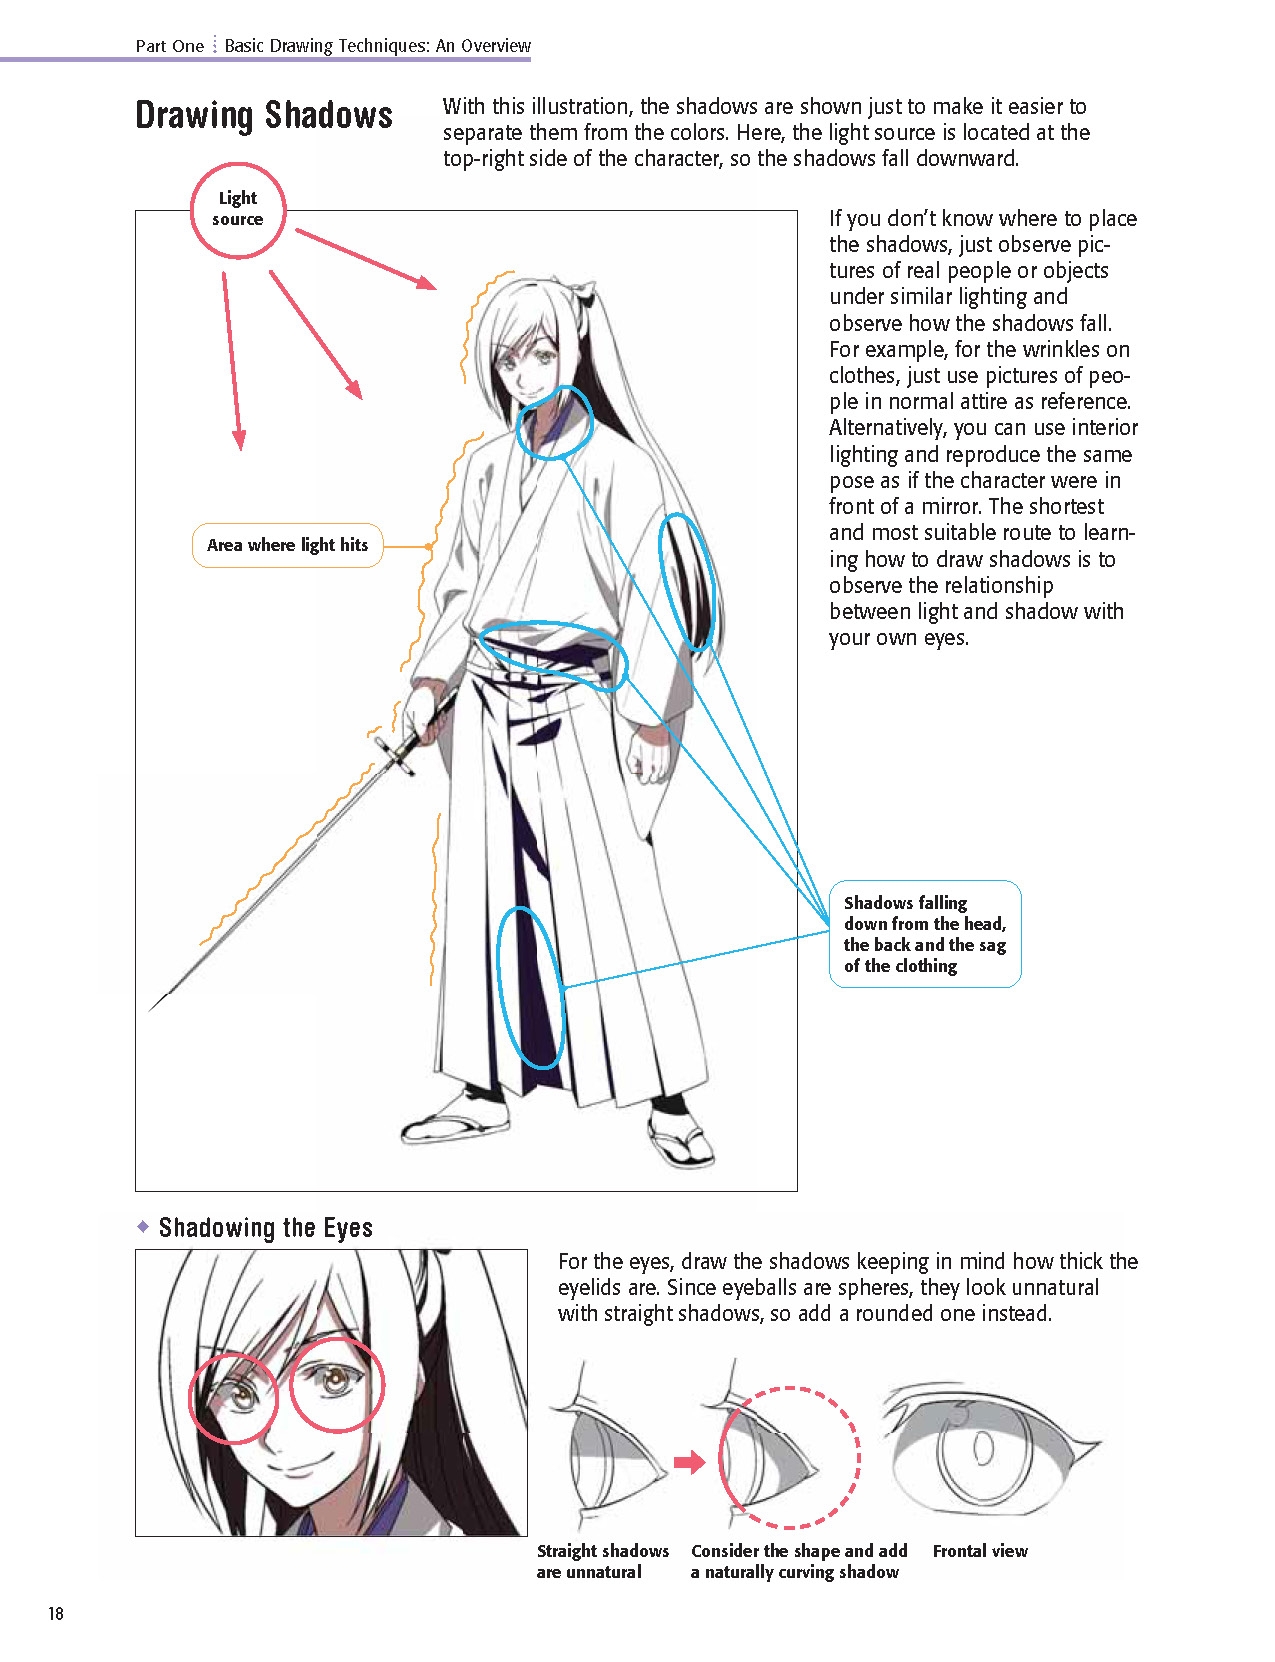 The Complete Guide to Drawing Dynamic Manga Sword Fighters: (An Action-Packed Guide with Over 600 illustrations) 19